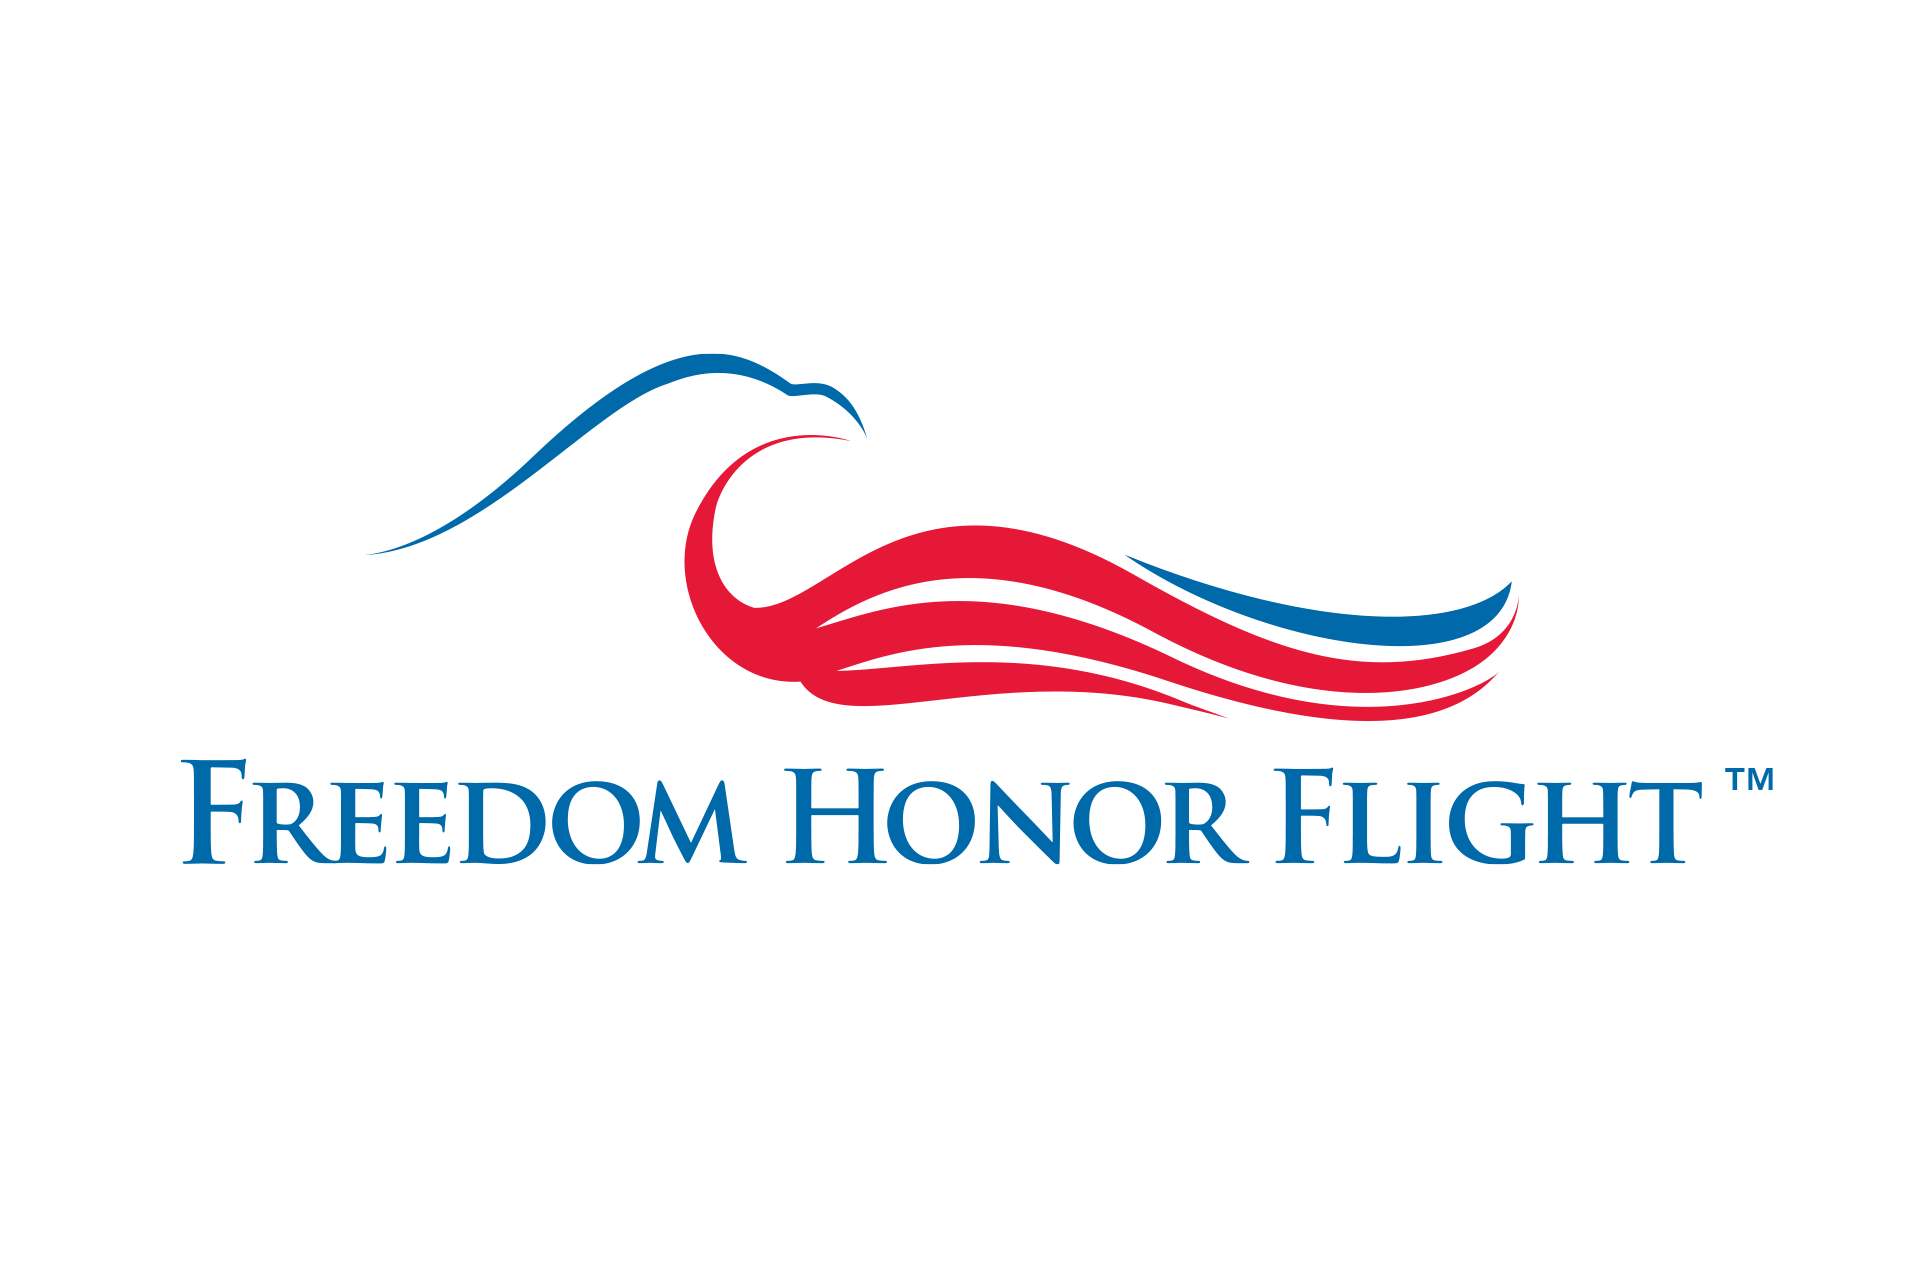 Freedom Honor Flight color logo, created by Vendi Advertising